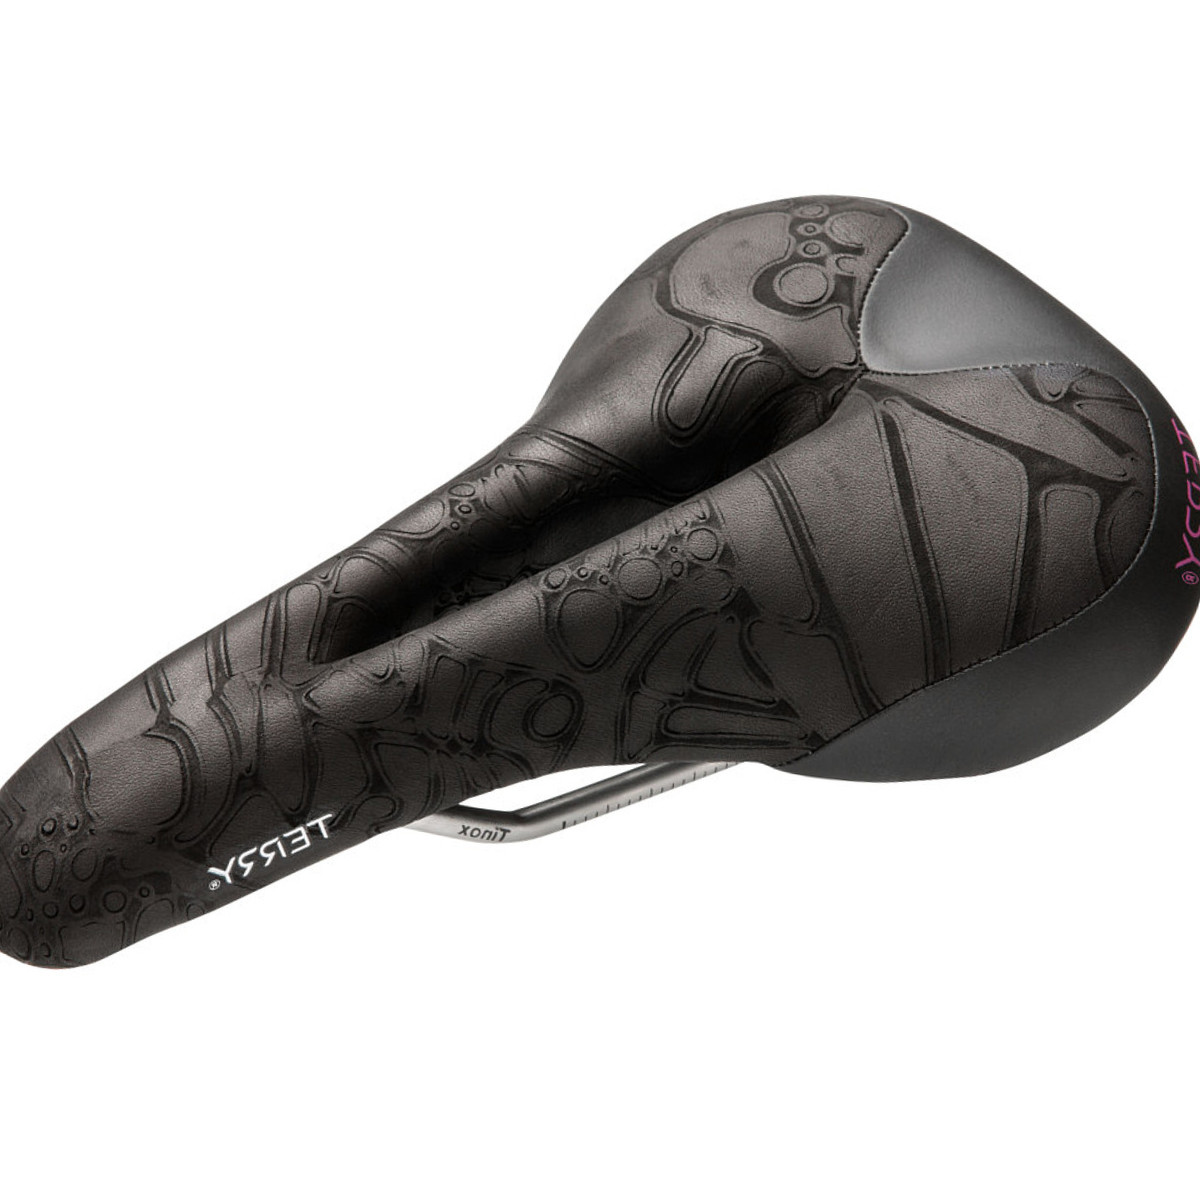 Terry Bicycles Butterfly TI Saddle - Women's